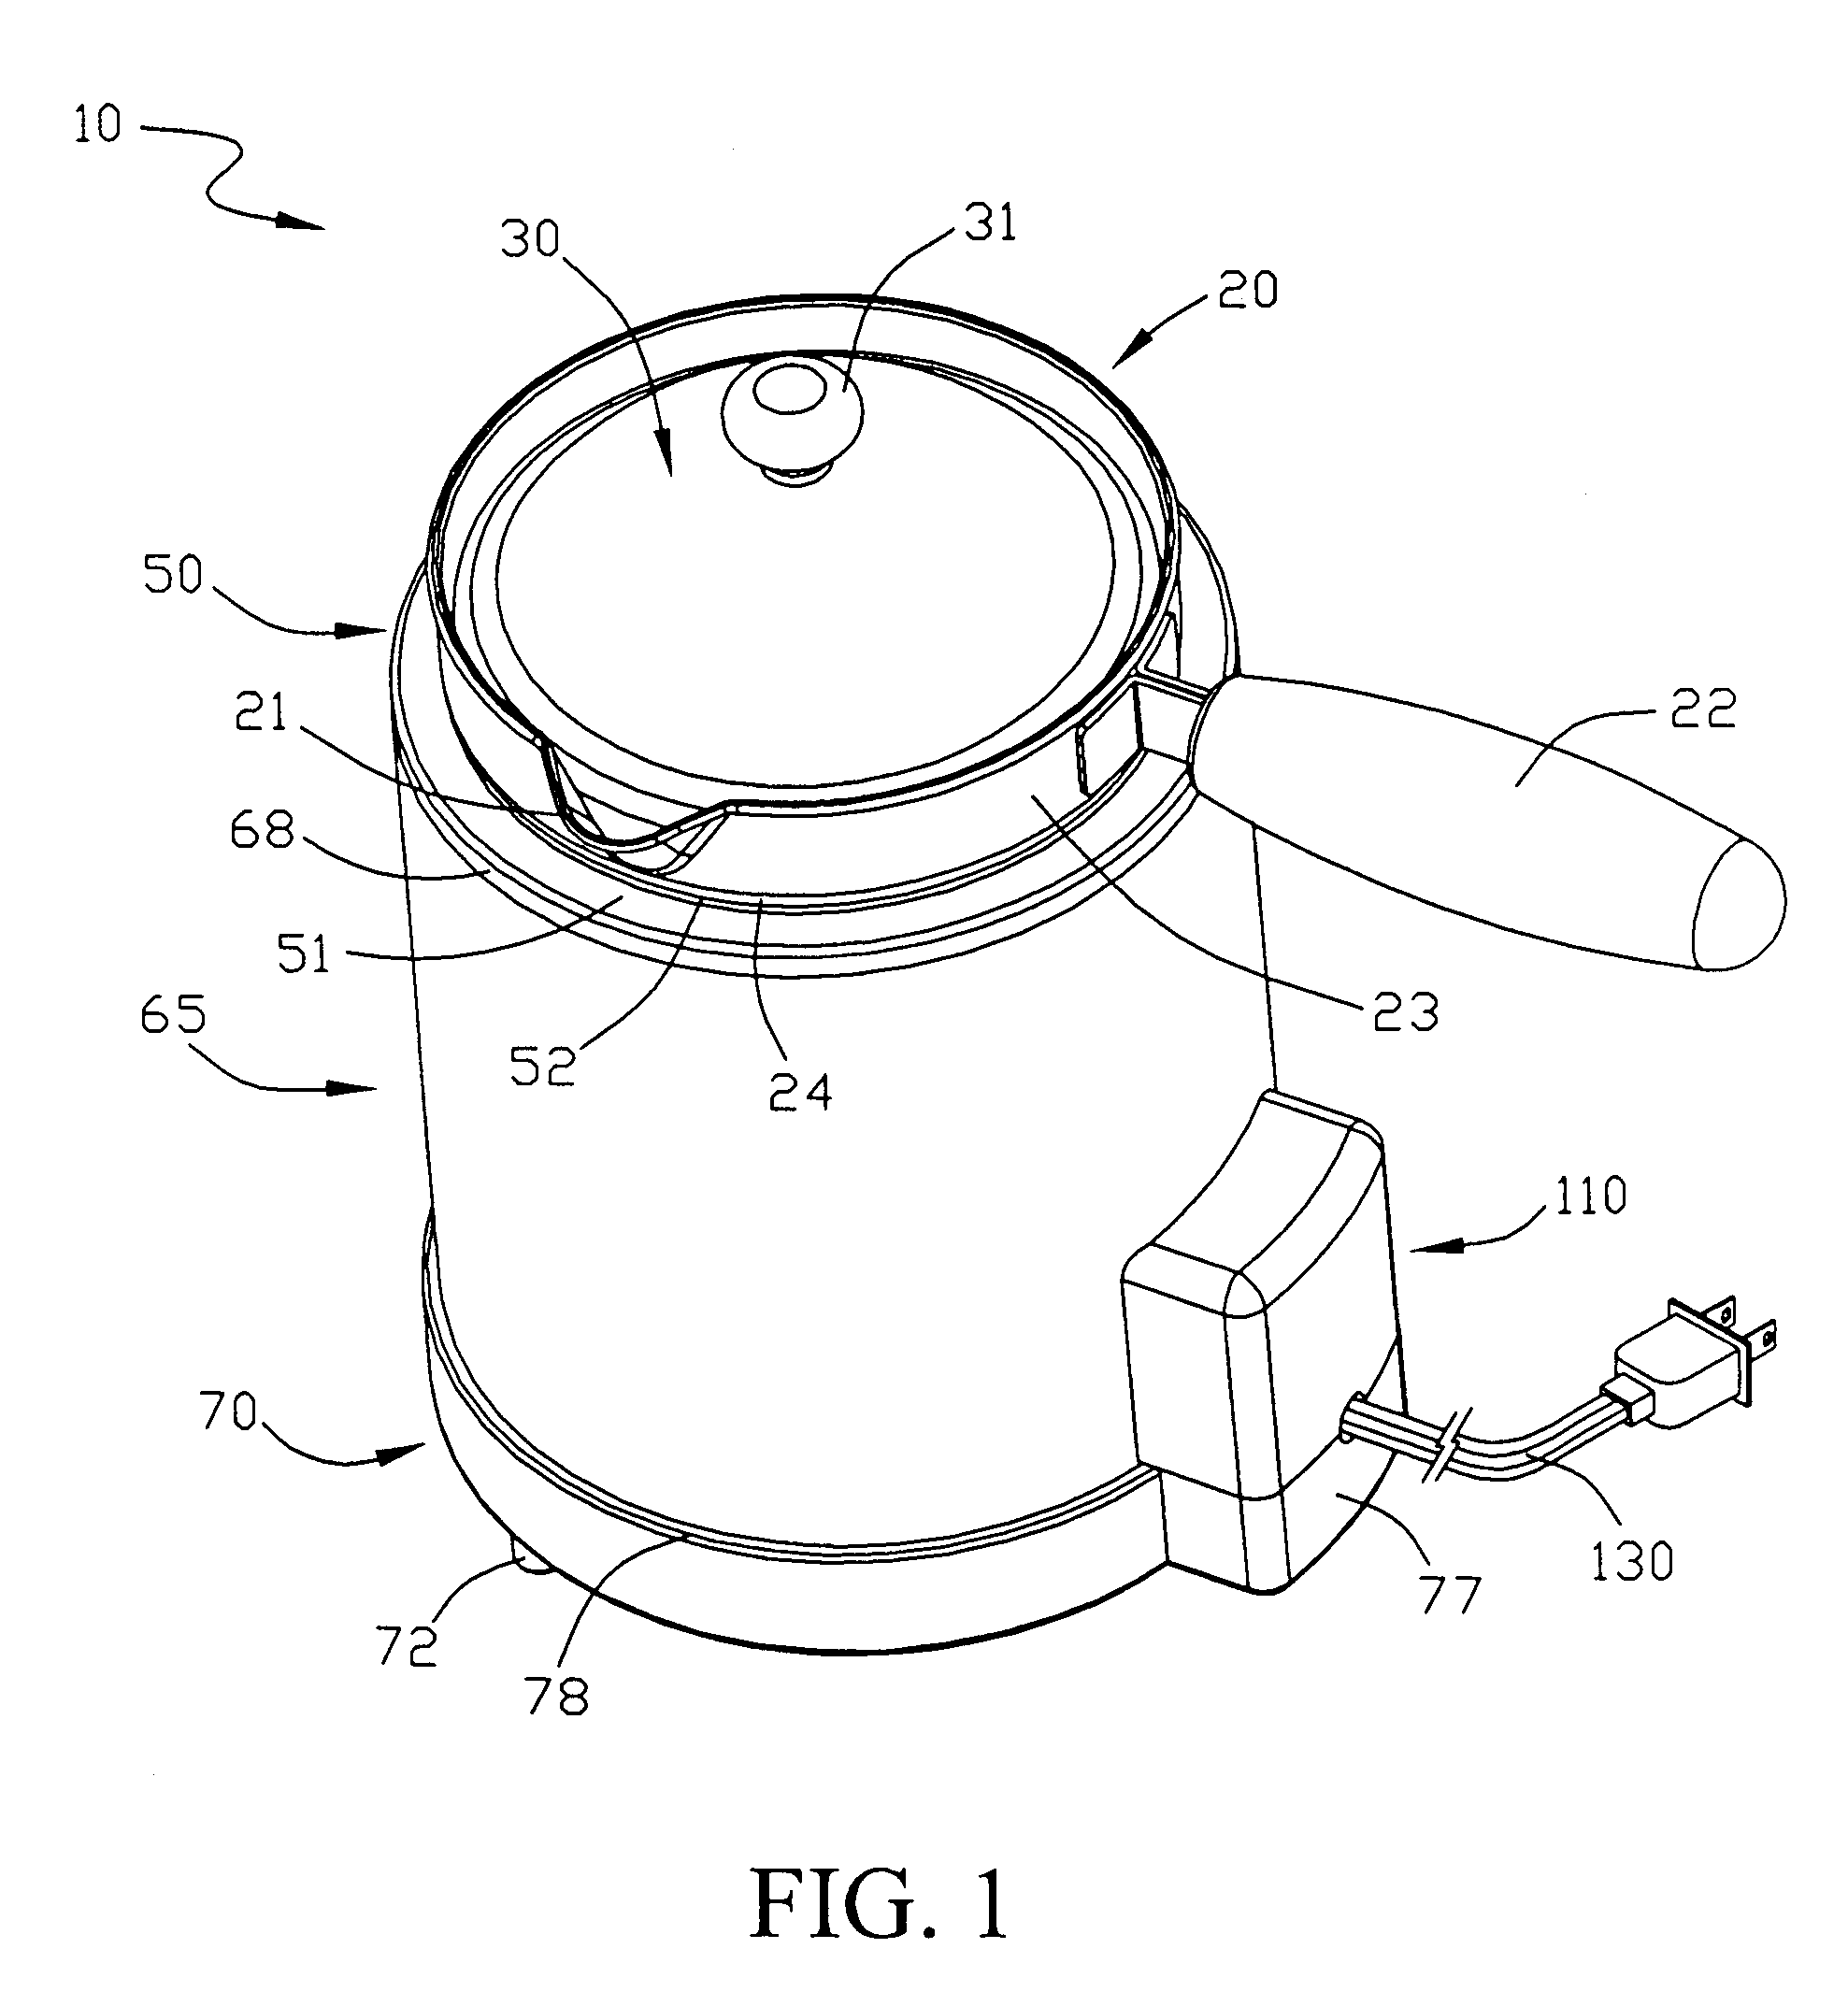 Heating apparatus with removable container, such as for foodstuffs, and features for moderating heat flux to the removable container